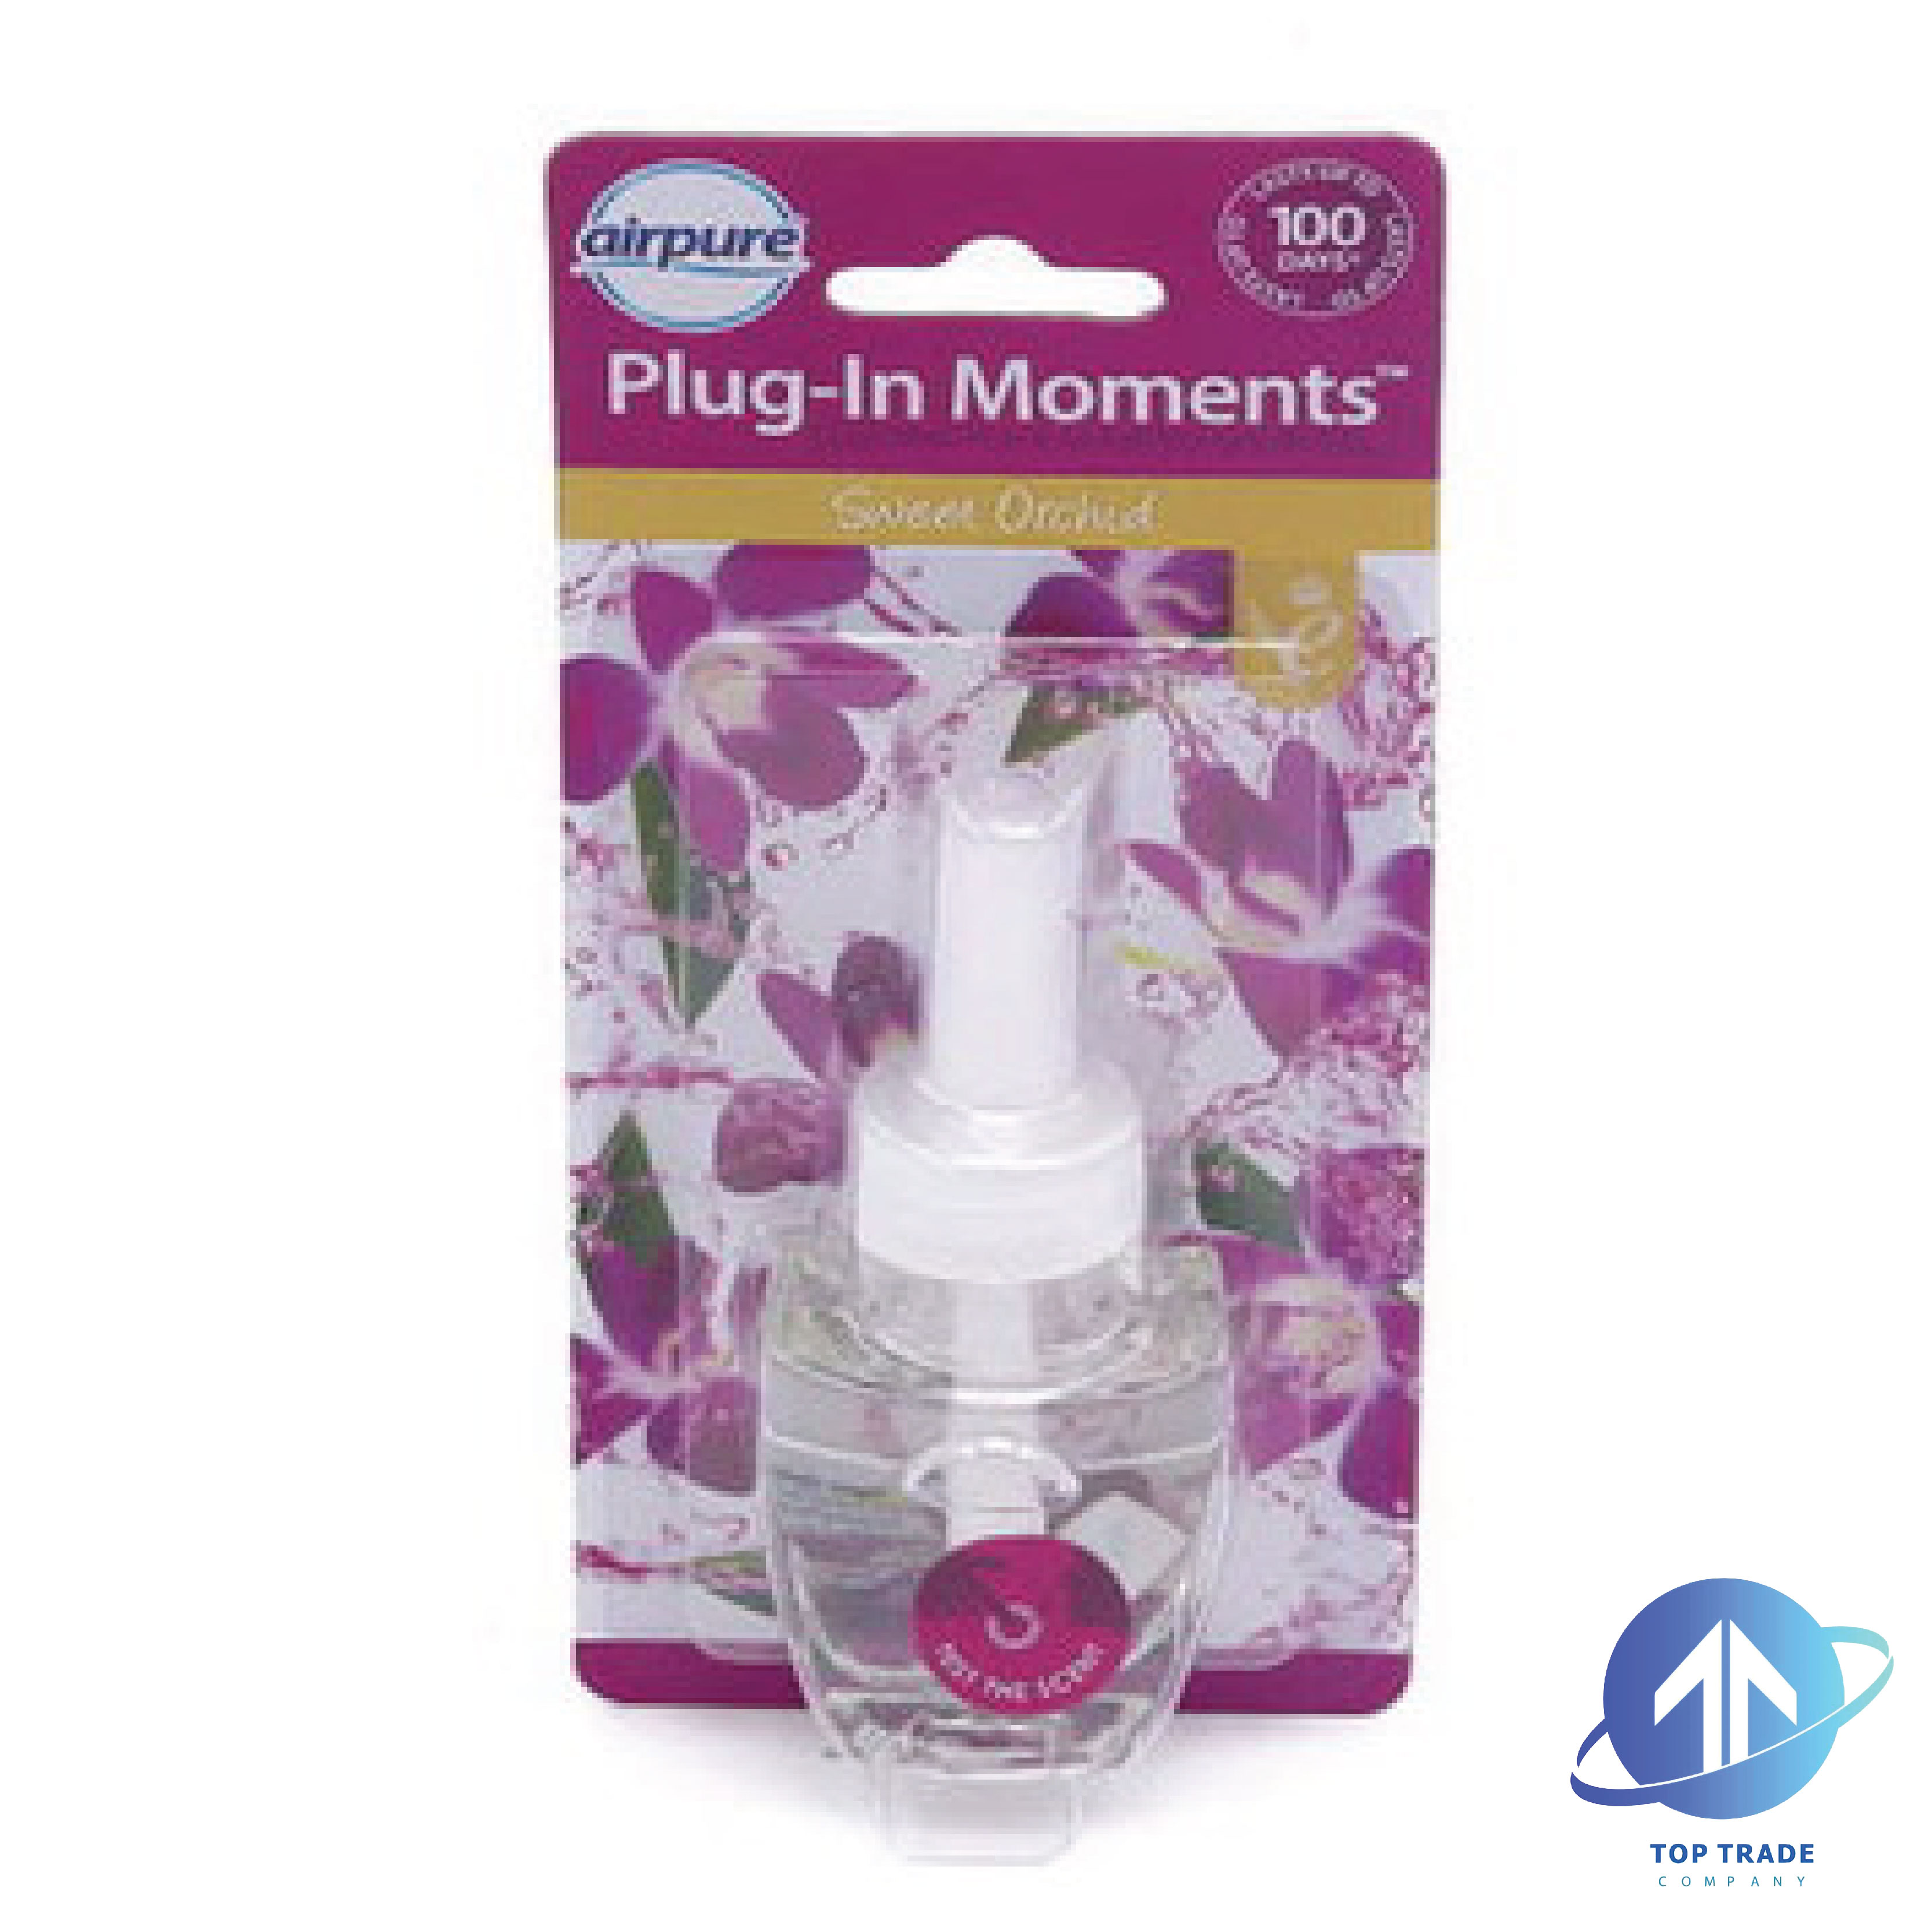 Airpure Plug-In Moments recharge Sweet Orchid